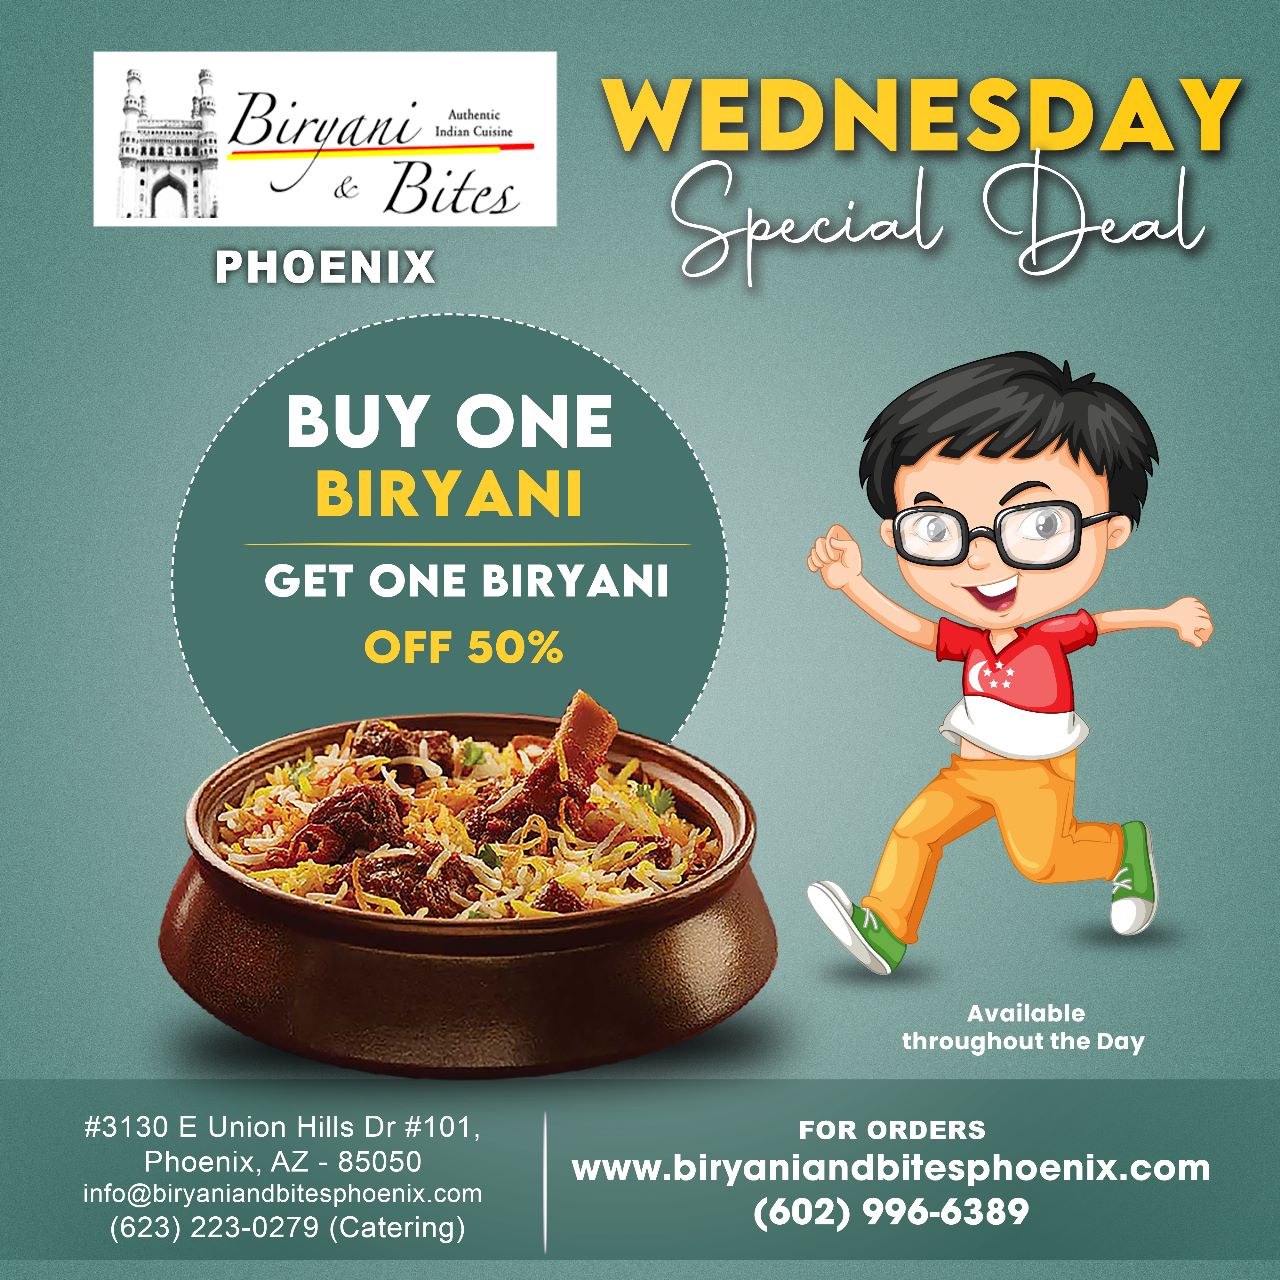 Wednesday Special Deal